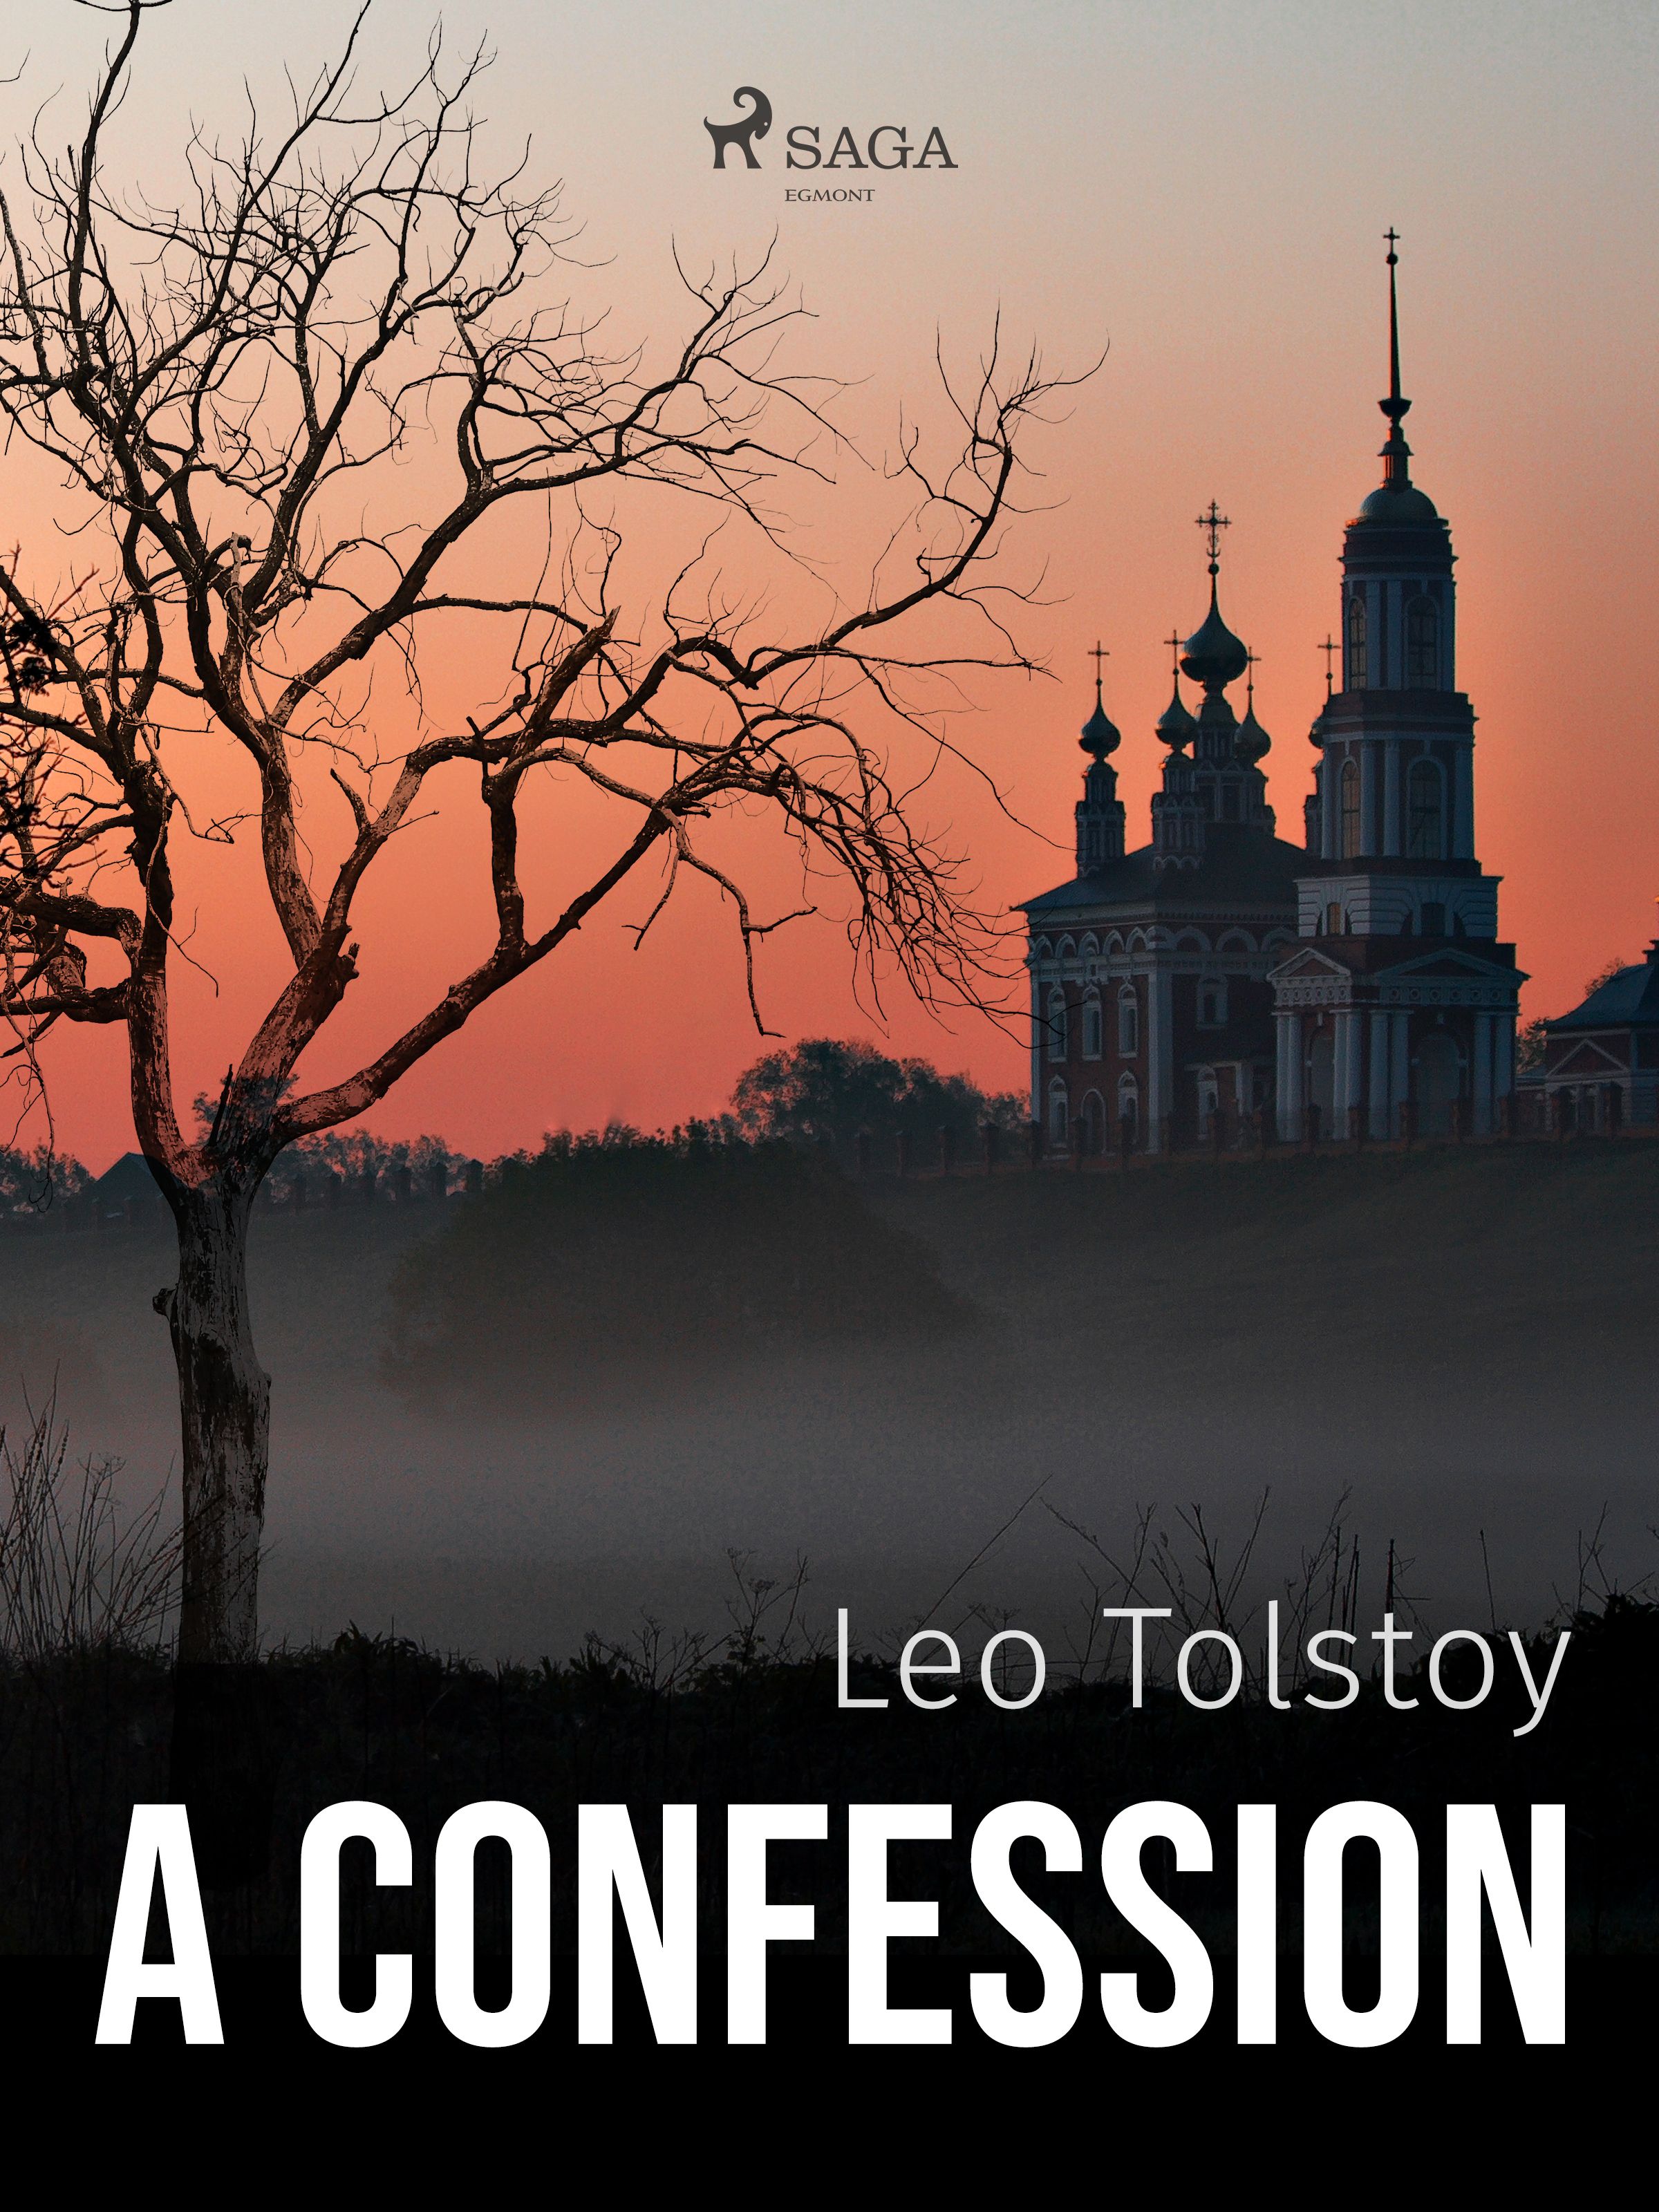 A Confession, eBook by Leo Tolstoy